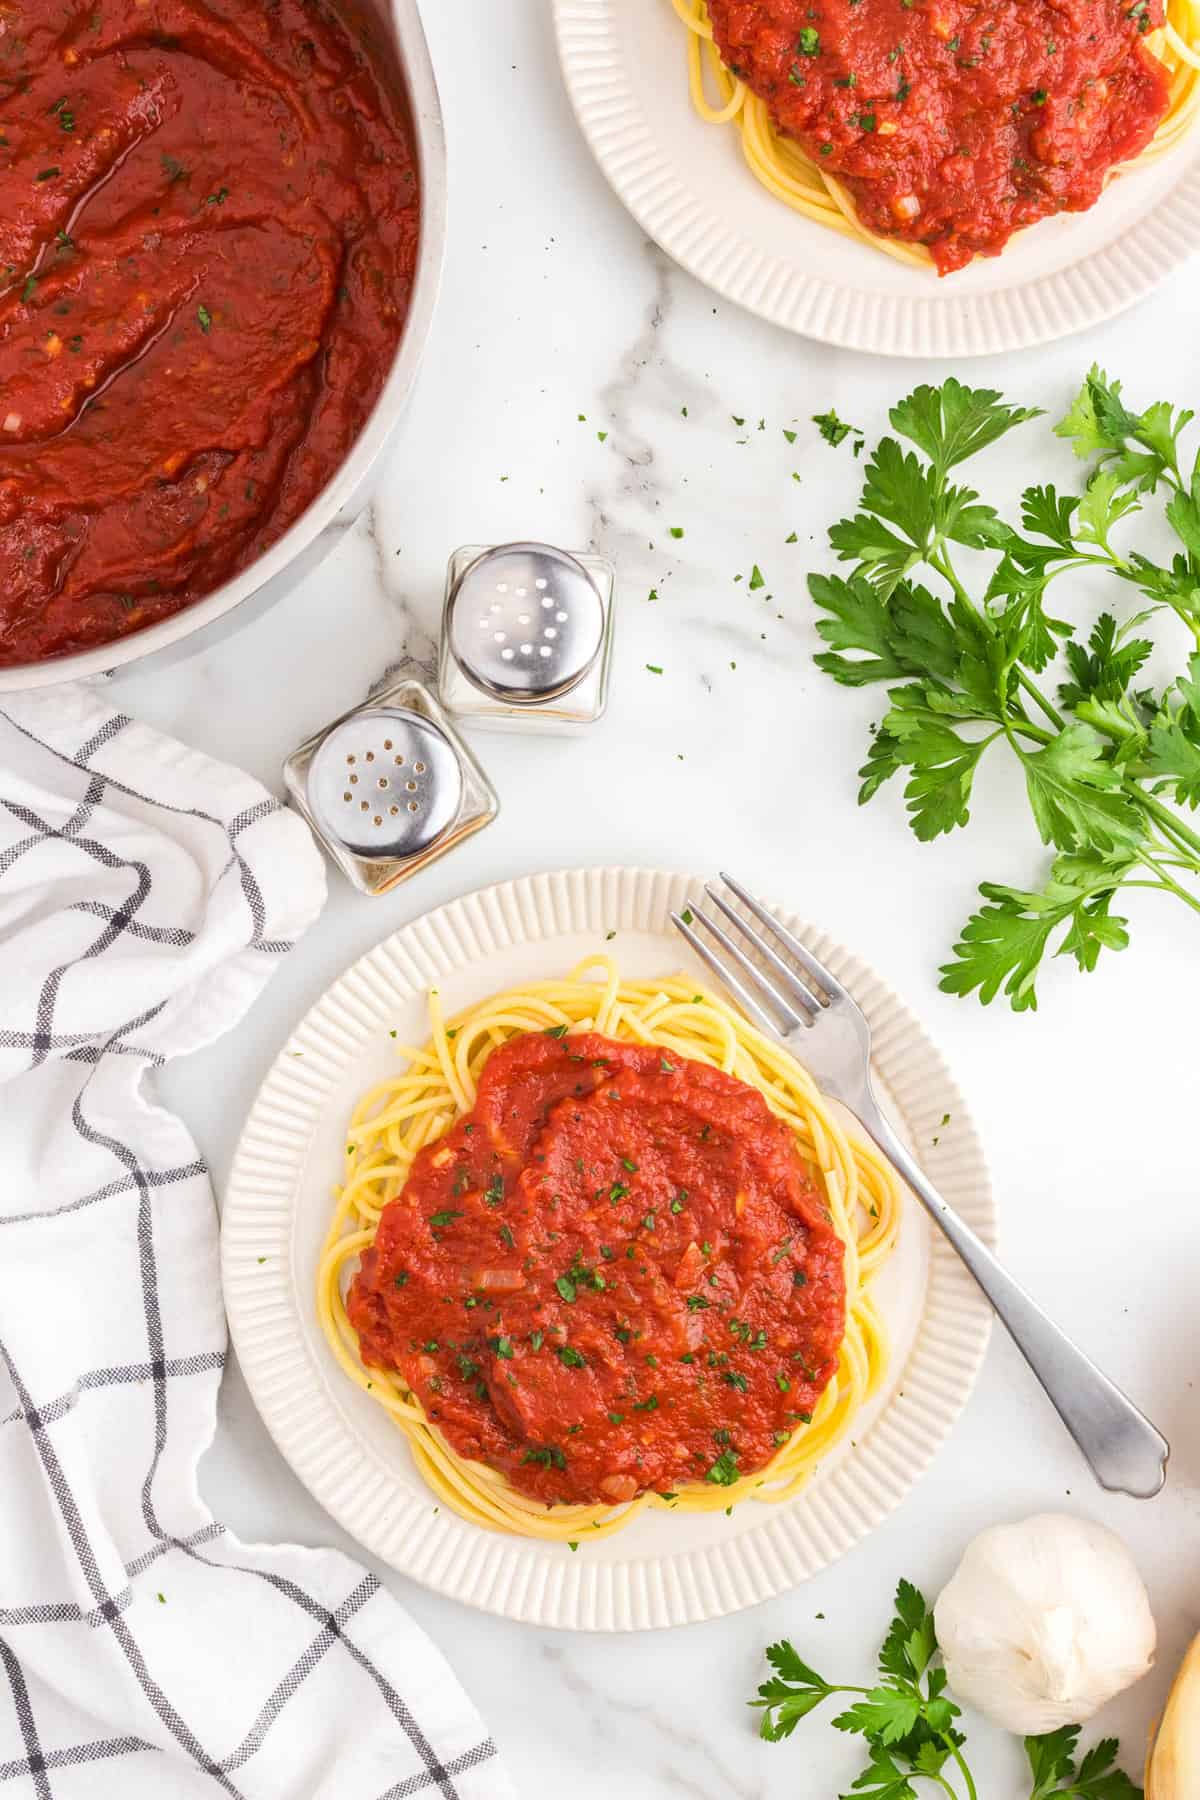 Best Marinara Sauce Recipe atop a bed of spahgetti noodles on plate